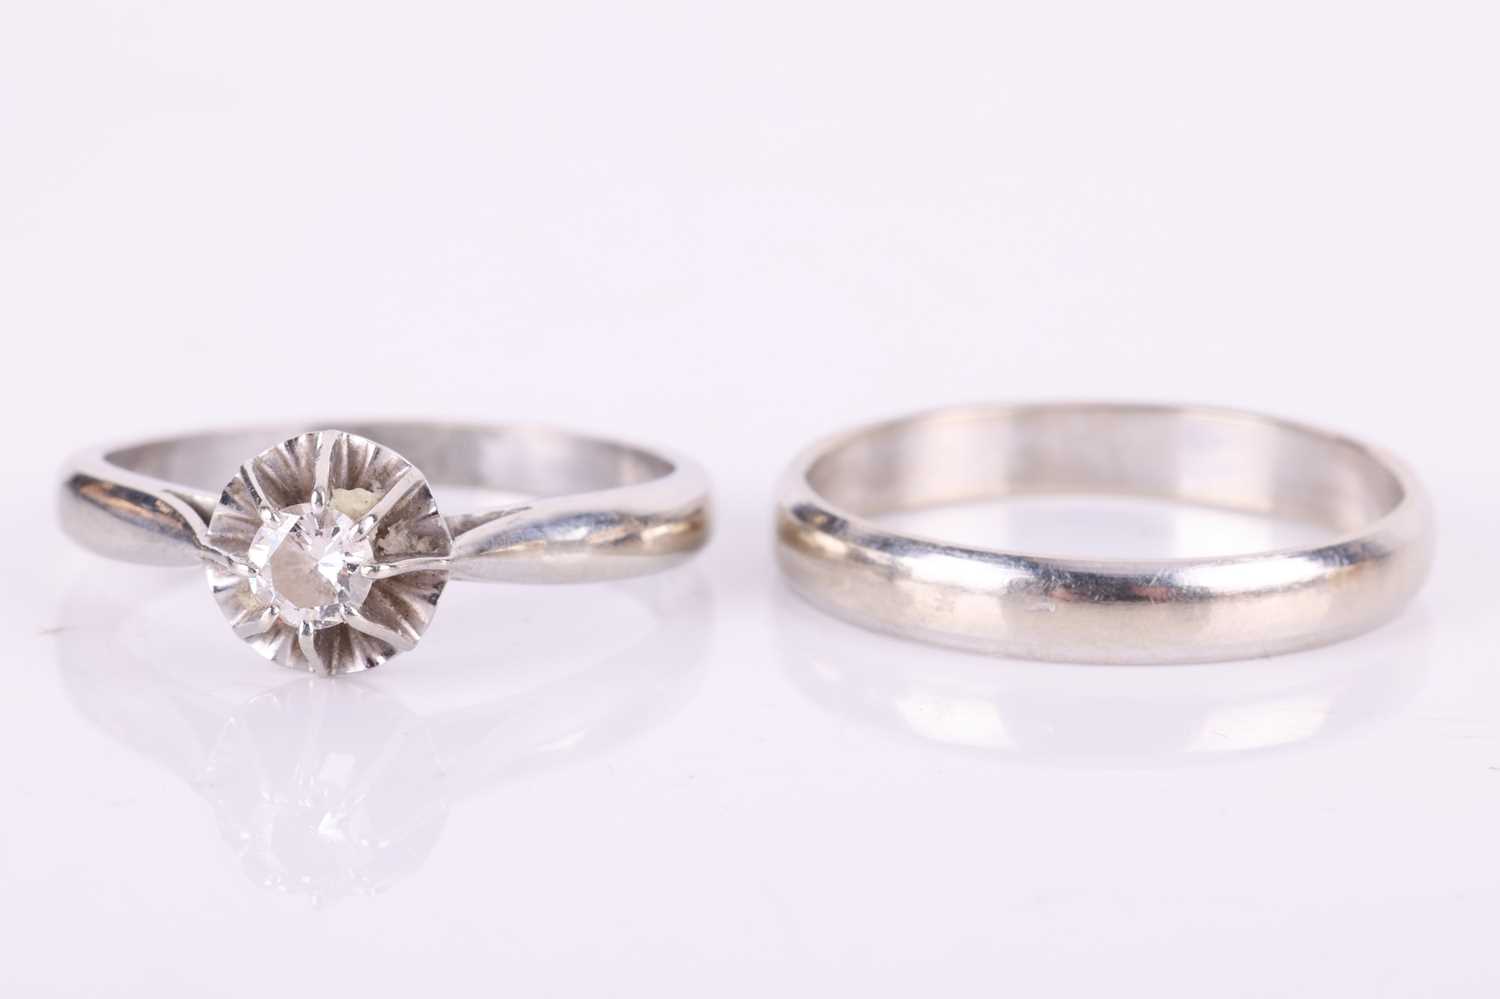 A diamond-set solitaire ring and matching wedding band; the illusion-set round brilliant diamond mea - Image 2 of 7